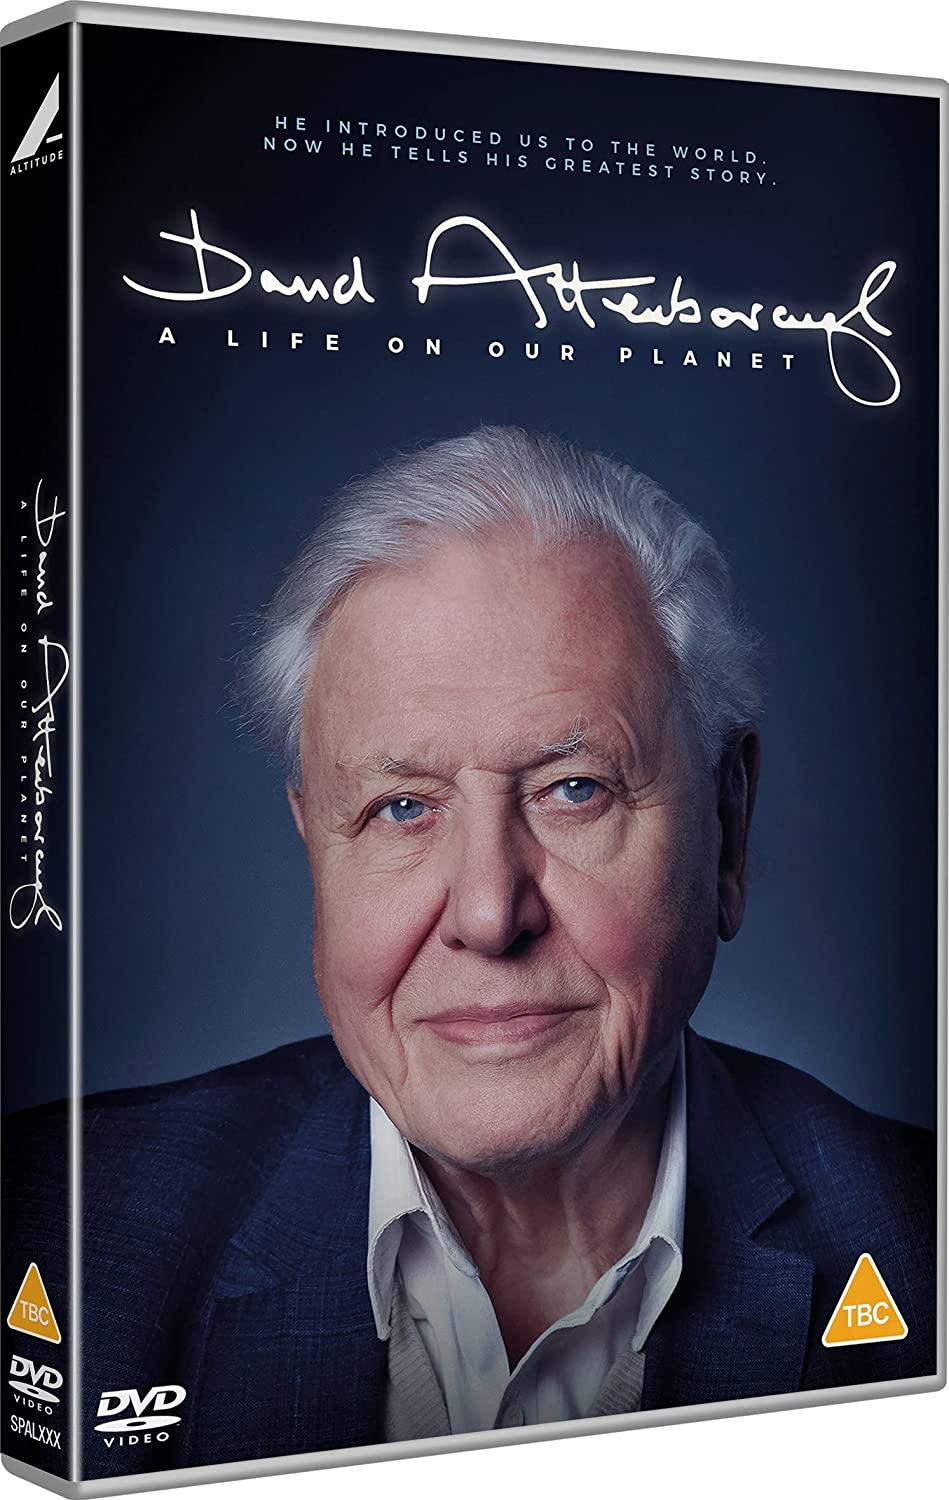 David Attenborough: A Life on Our Planet  [2020] - Documentary [DVD]